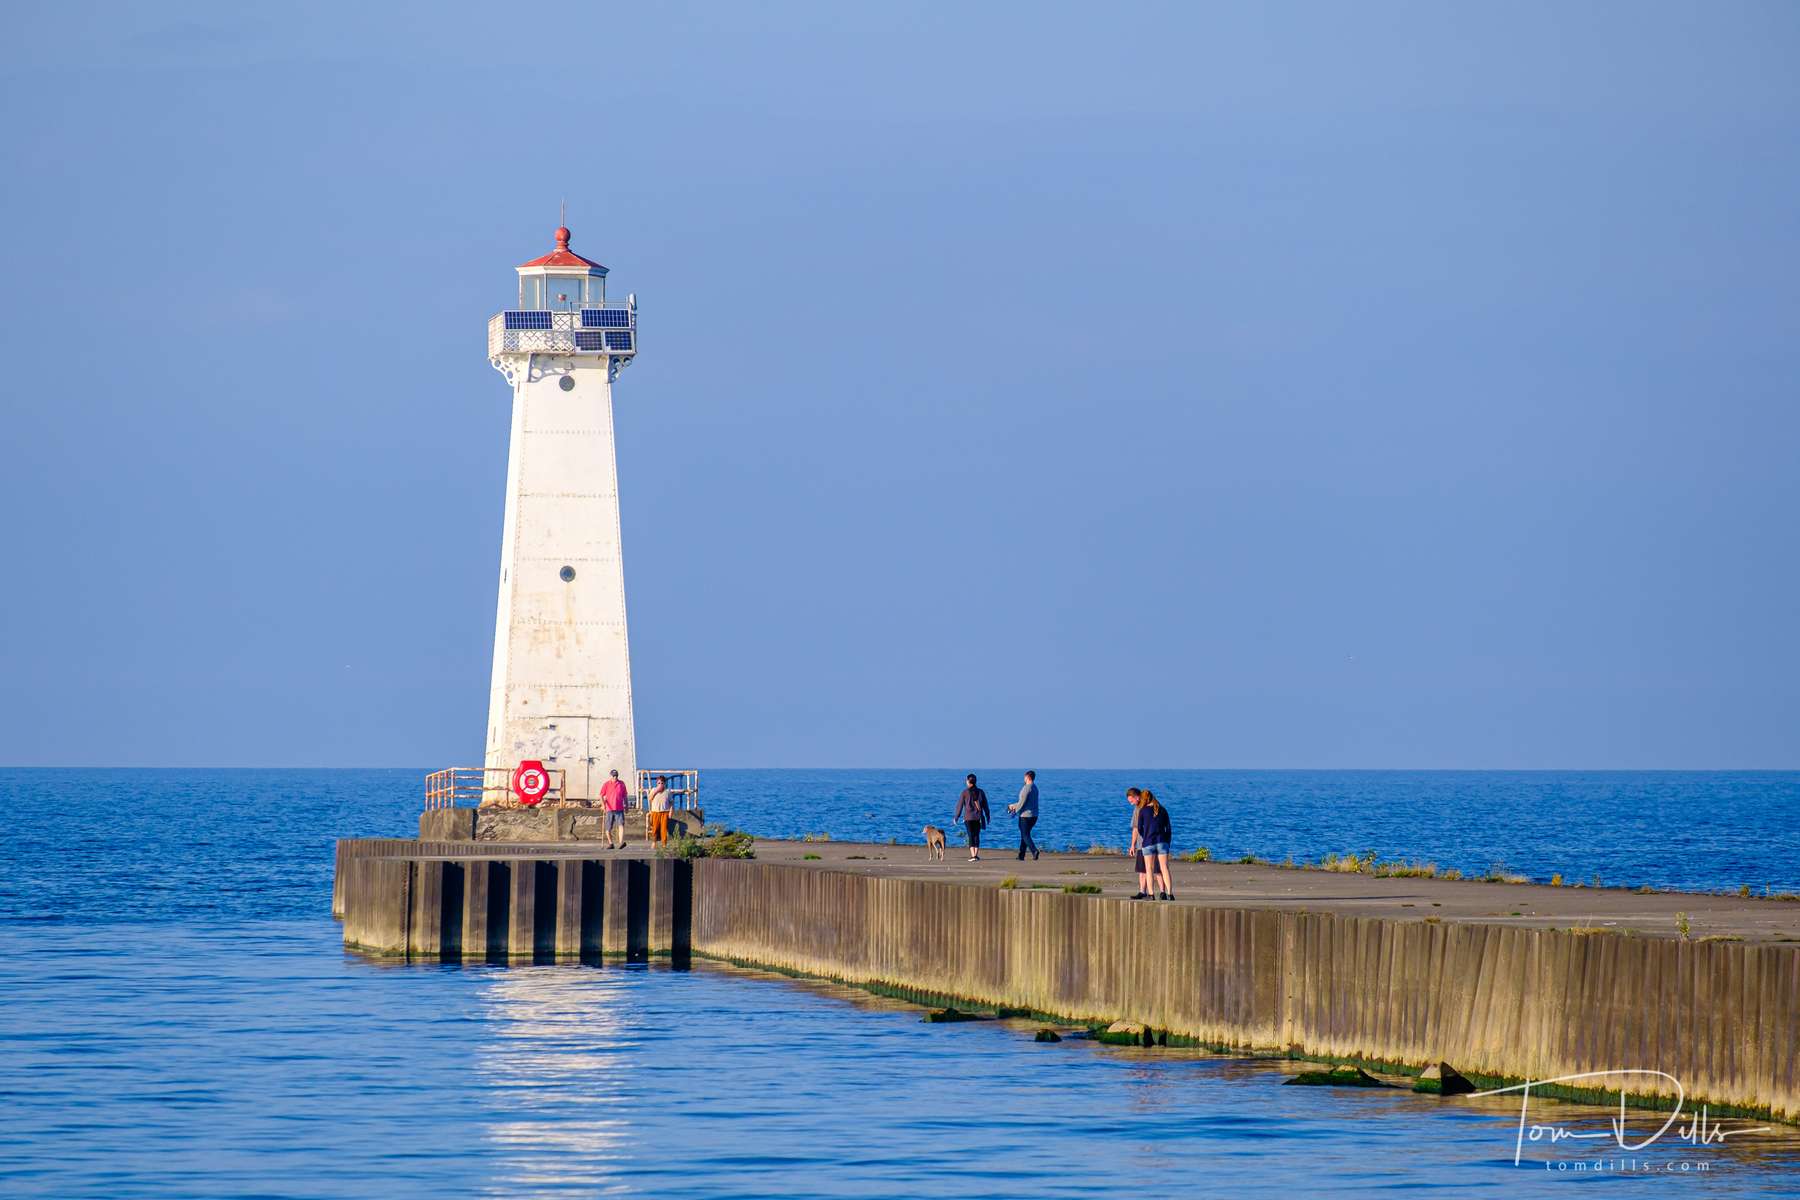 Sodus Bay Lighthouse on the shore of Lake Ontario at Sodus Point, New York